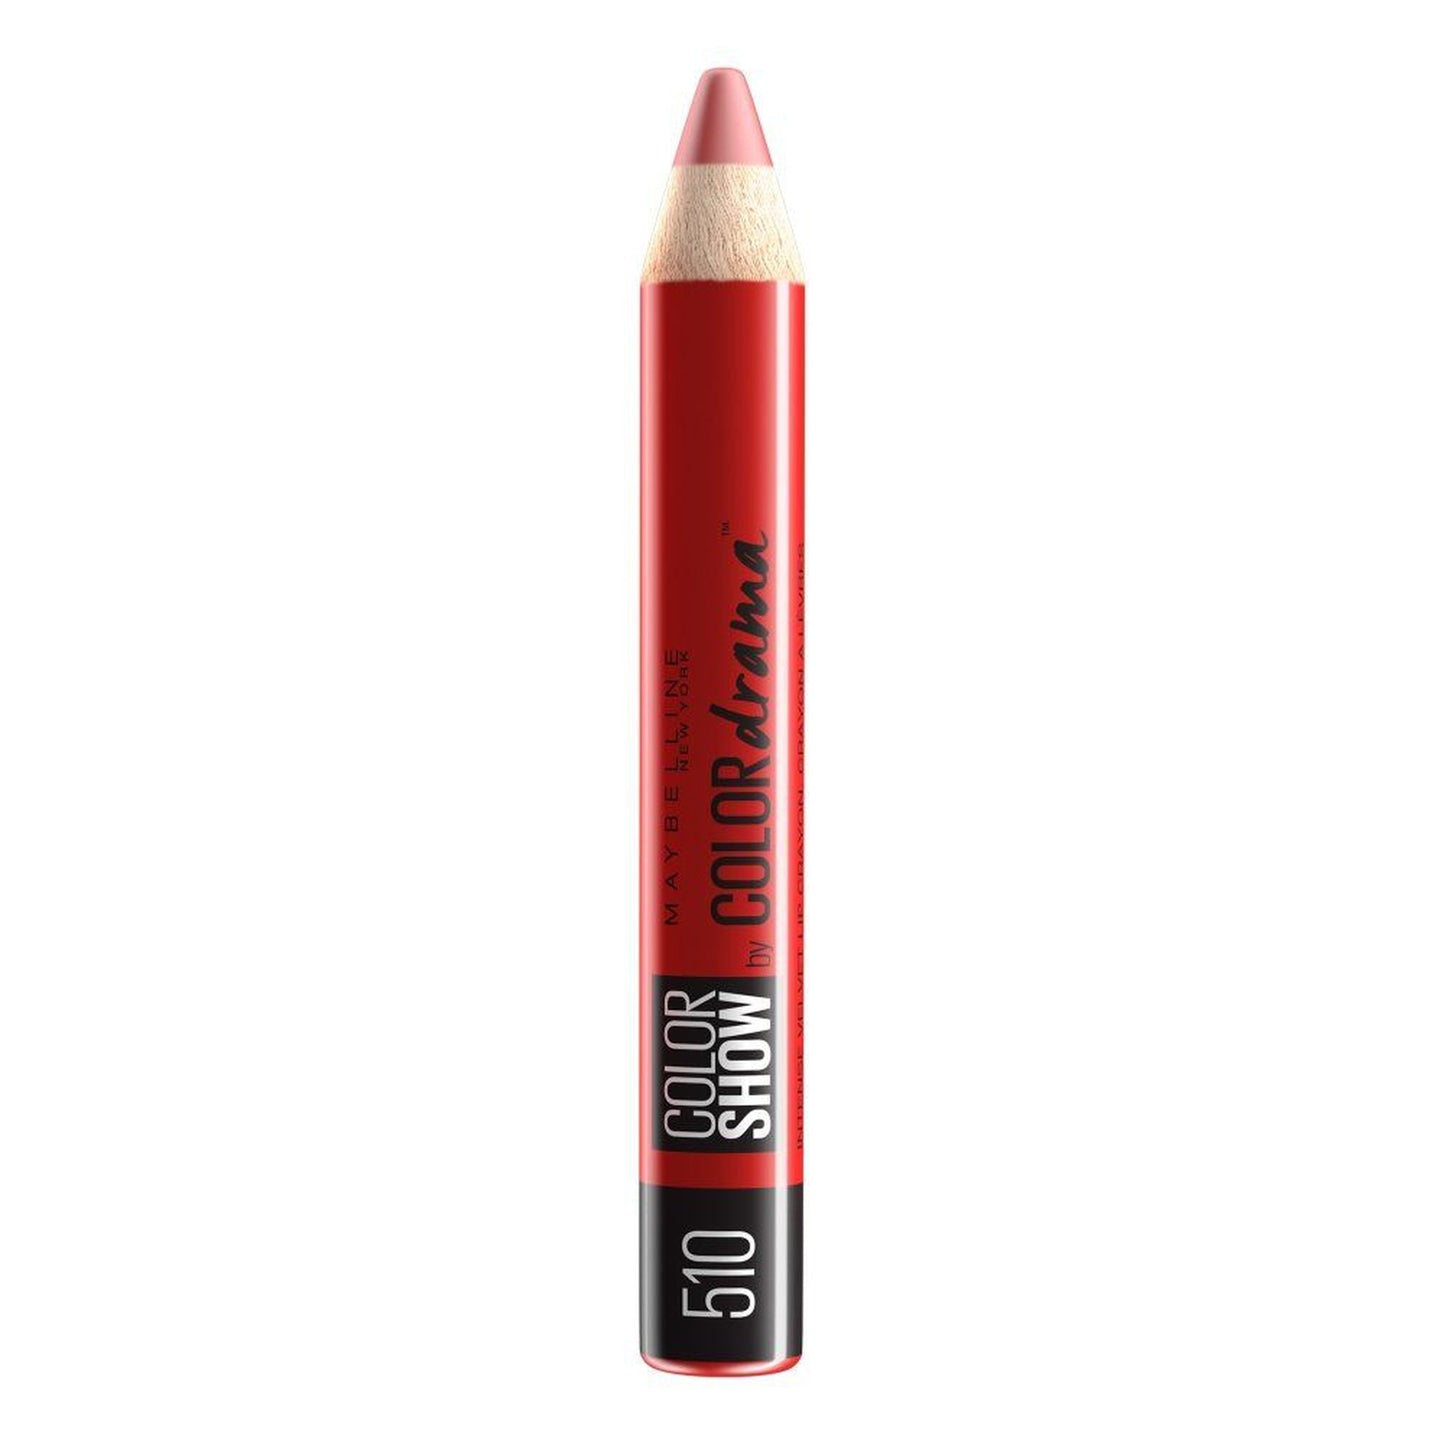 Maybelline New York Color Drama Intense Velvet Lip Pencil - 510 Red Essential-Maybelline-BeautyNmakeup.co.uk